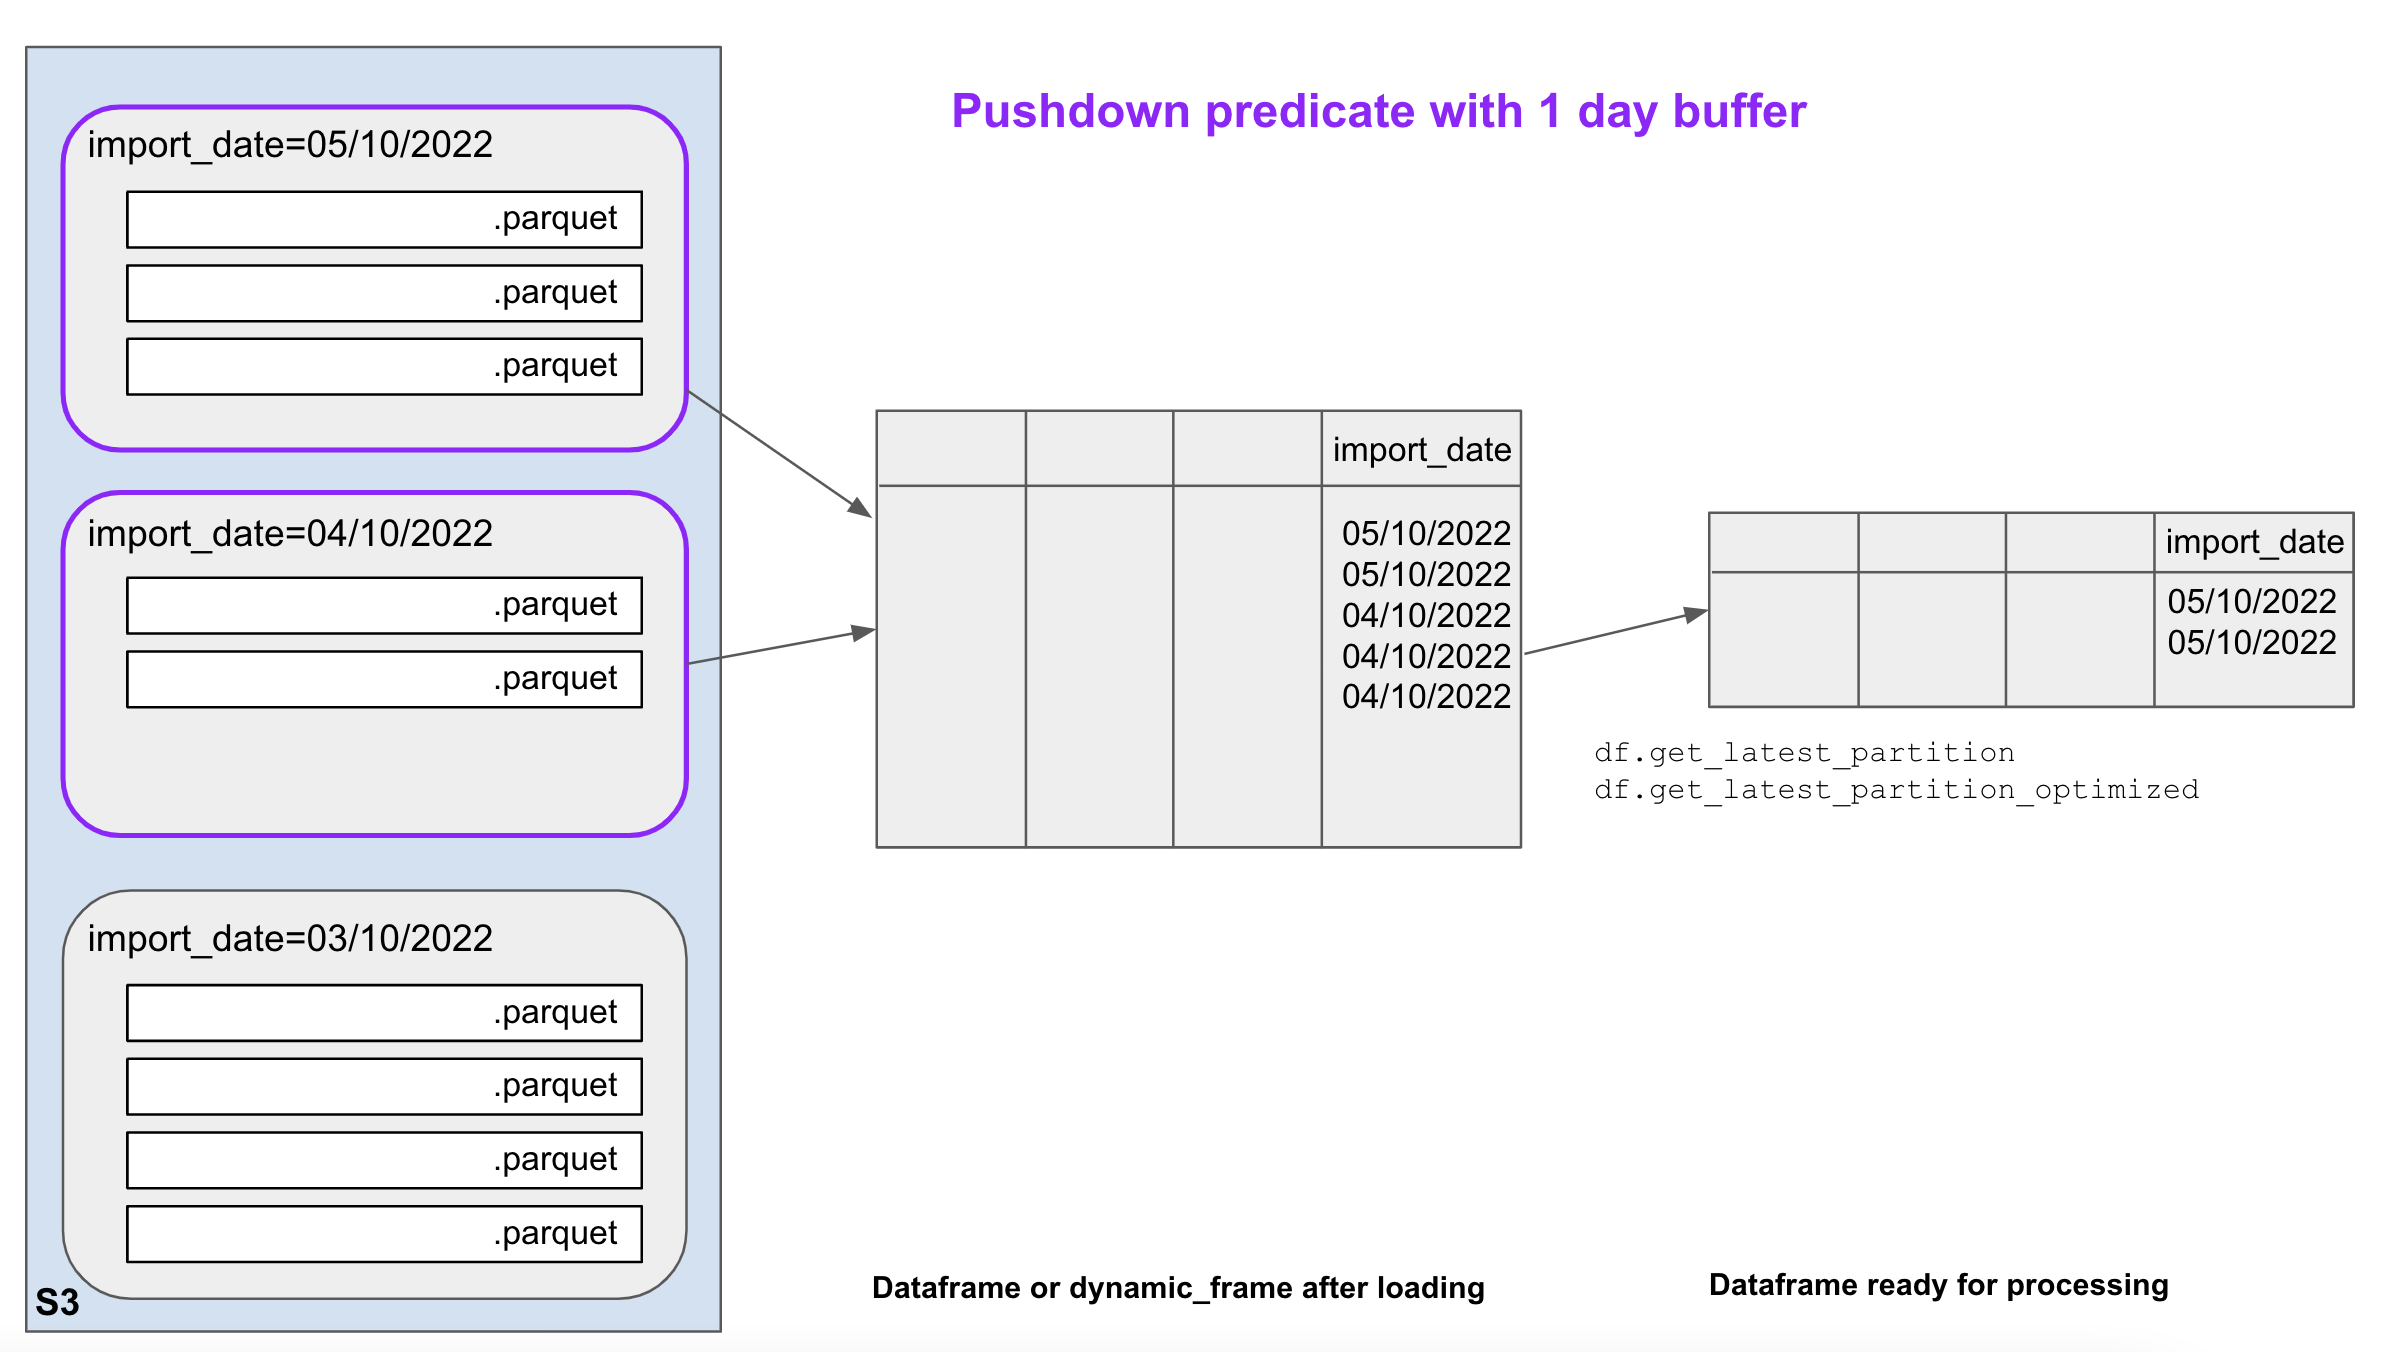 Loading and processing data from S3 using a pushdown predicate with a 1 day buffer